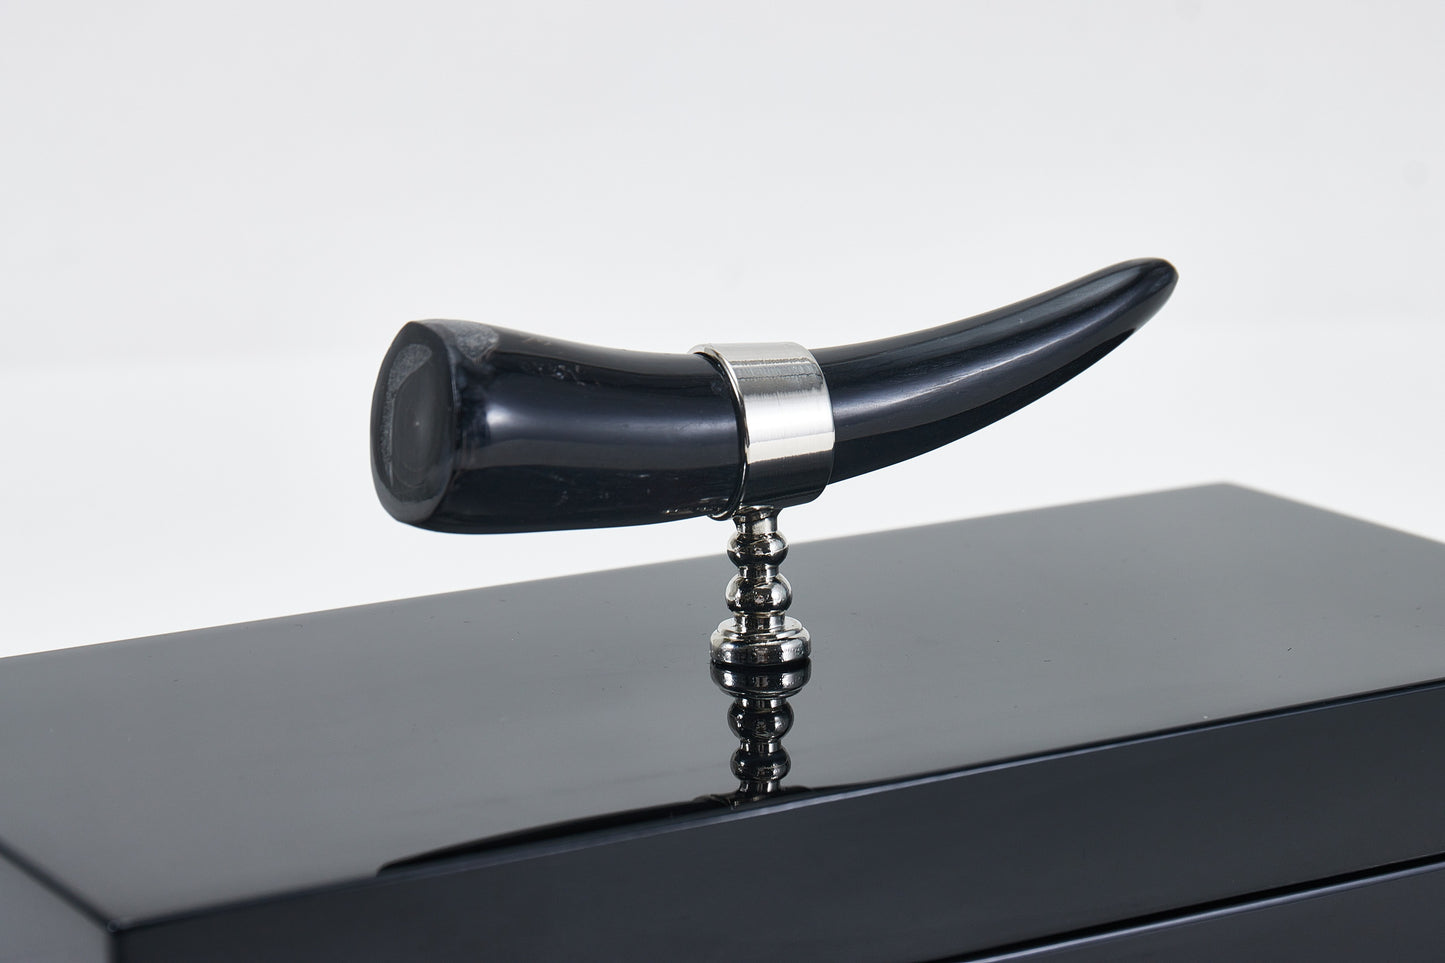 Black Mdf & Horn Box With Horn Handle